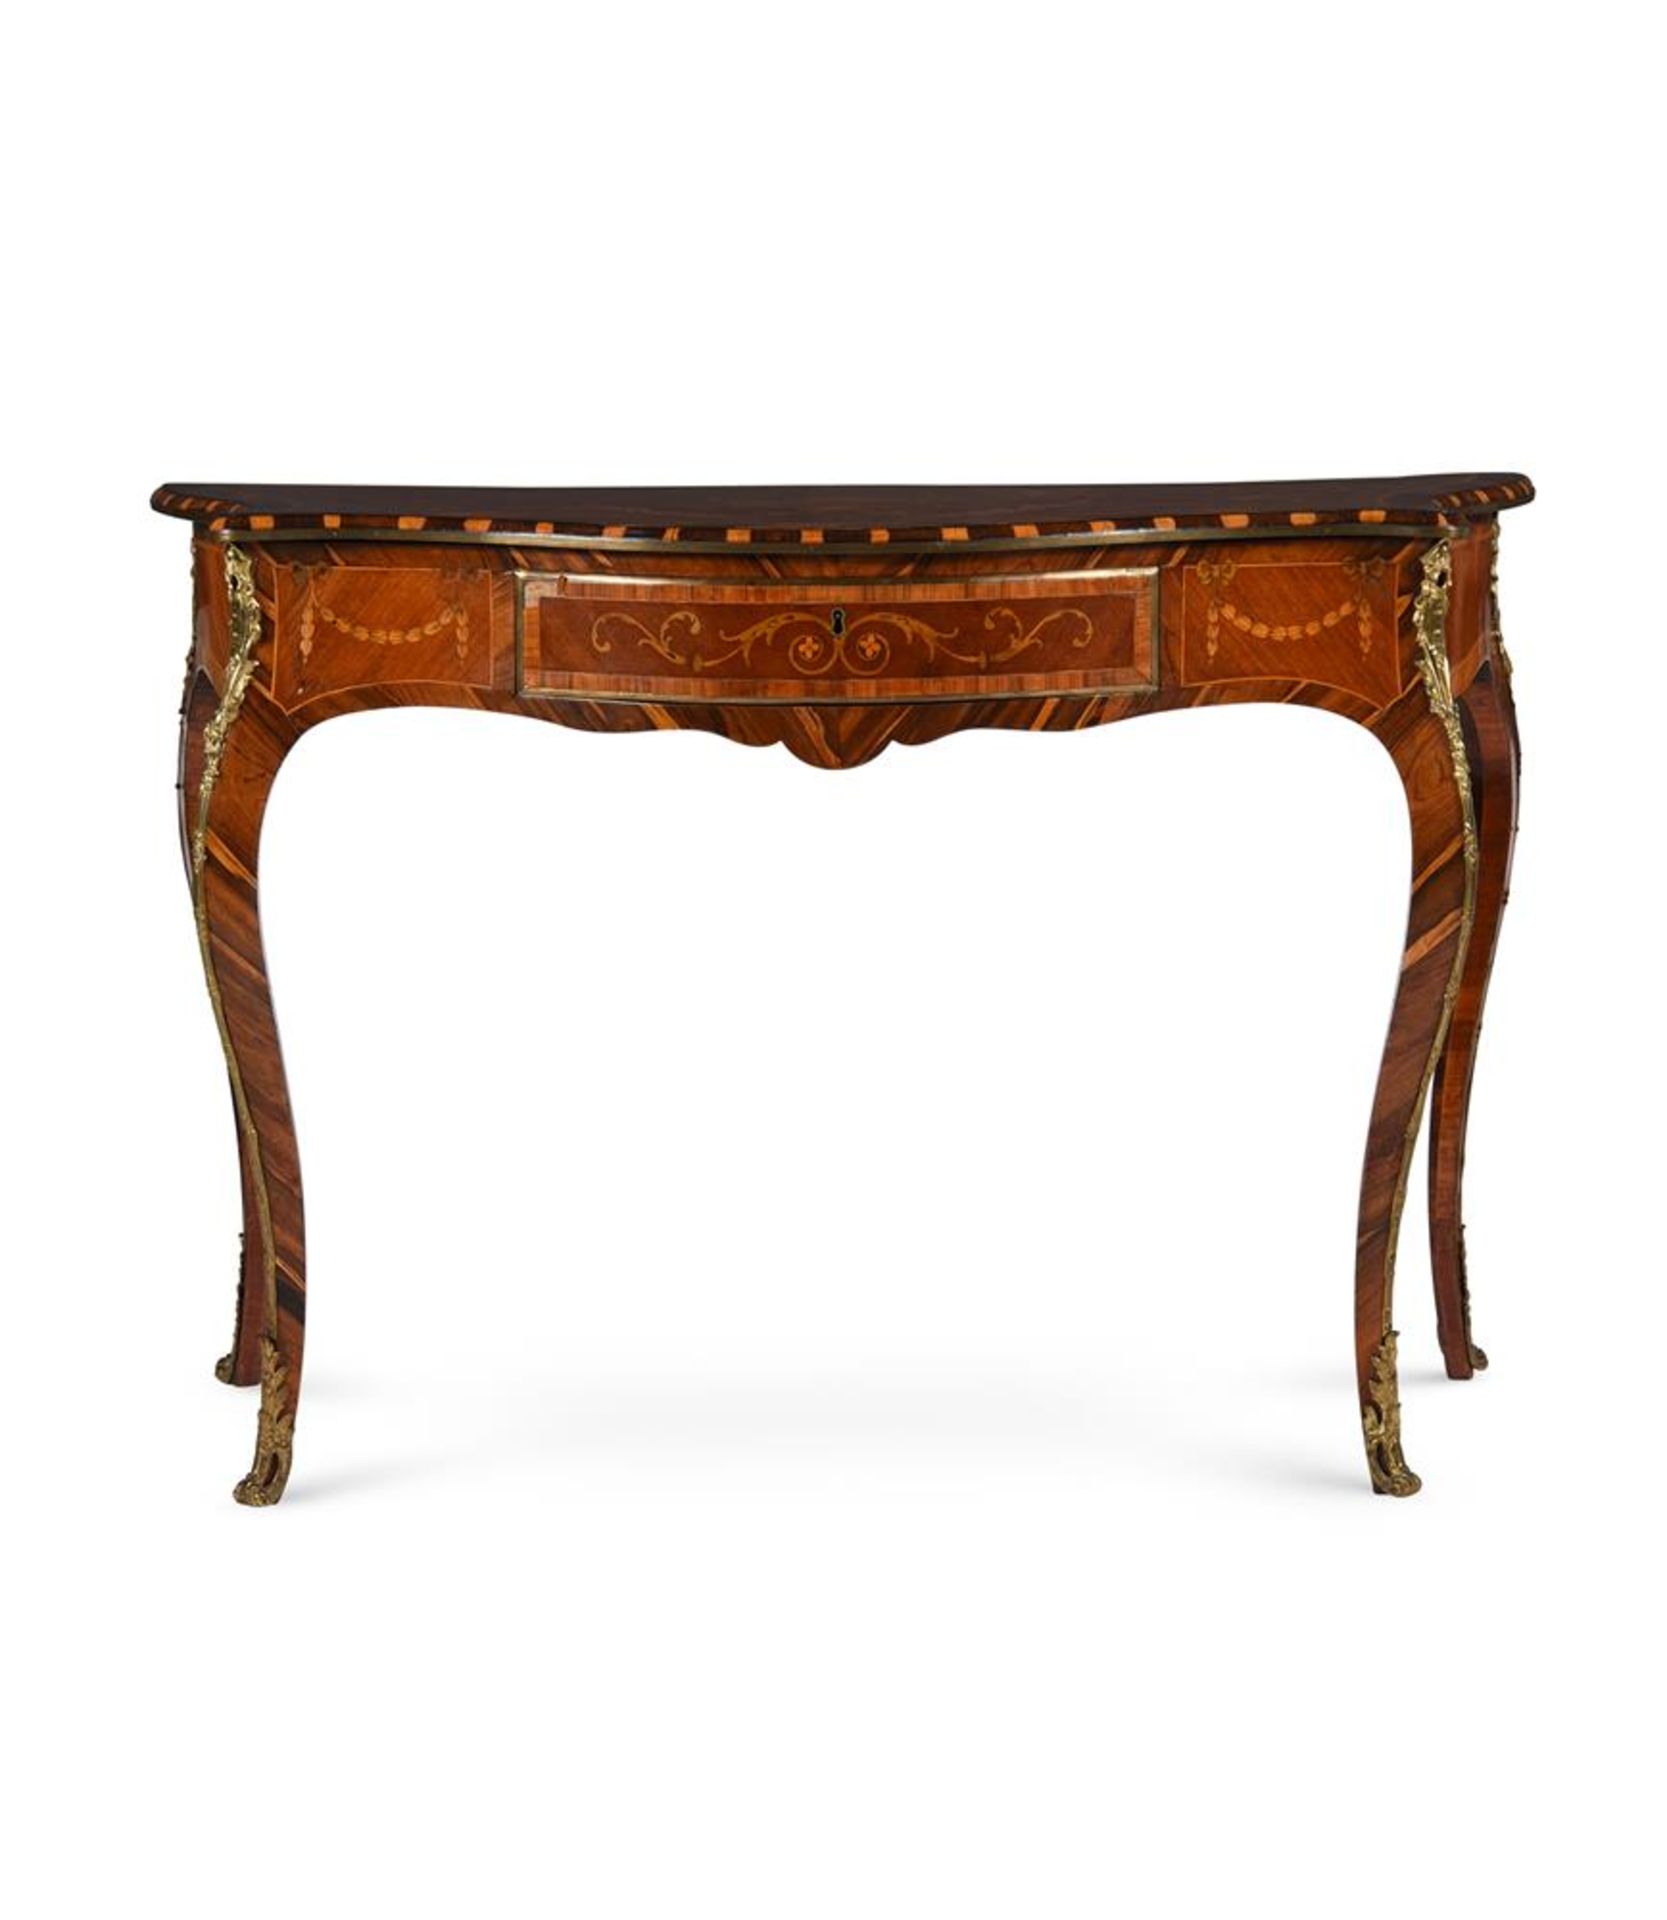 Y A COCUSWOOD, MAHOGANY, ROSEWOOD, MARQUETRY AND GILT METAL MOUNTED SERPENTINE SIDE TABLE